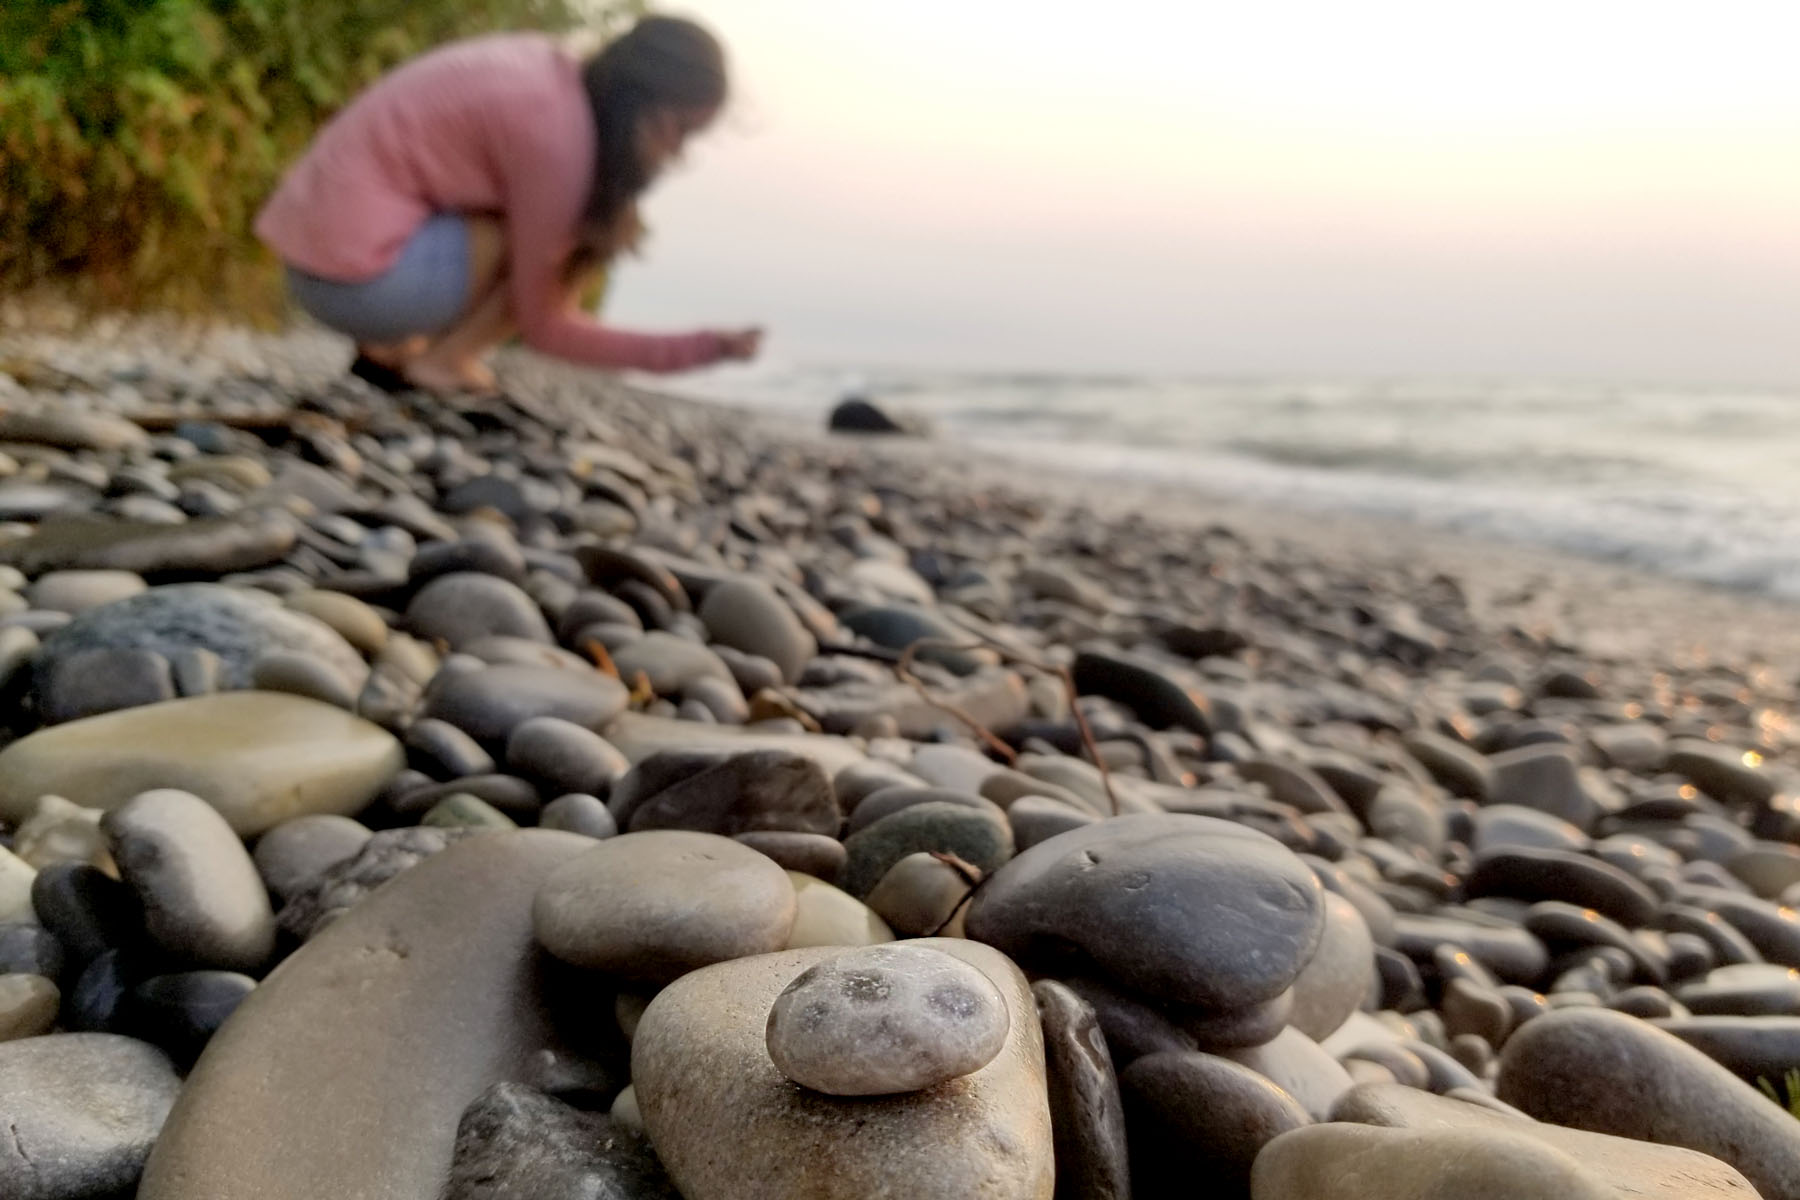 Where to Find Petoskey Stones